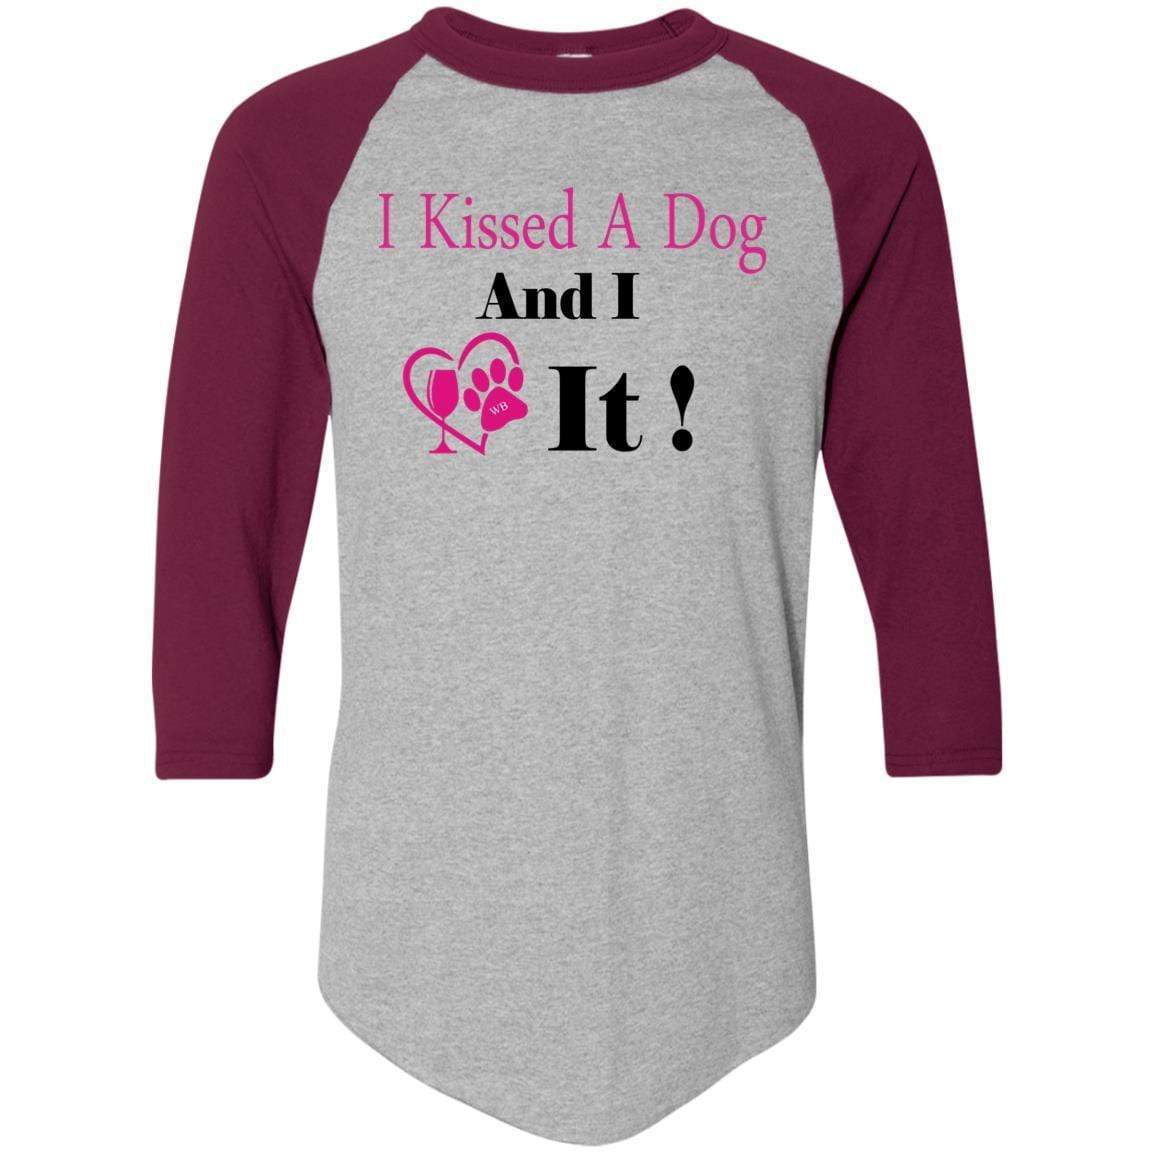 T-Shirts Athletic Heather/Maroon / S WineyBitches.co "I Kissed A Dog And I Loved It:" Colorblock Raglan Jersey WineyBitchesCo